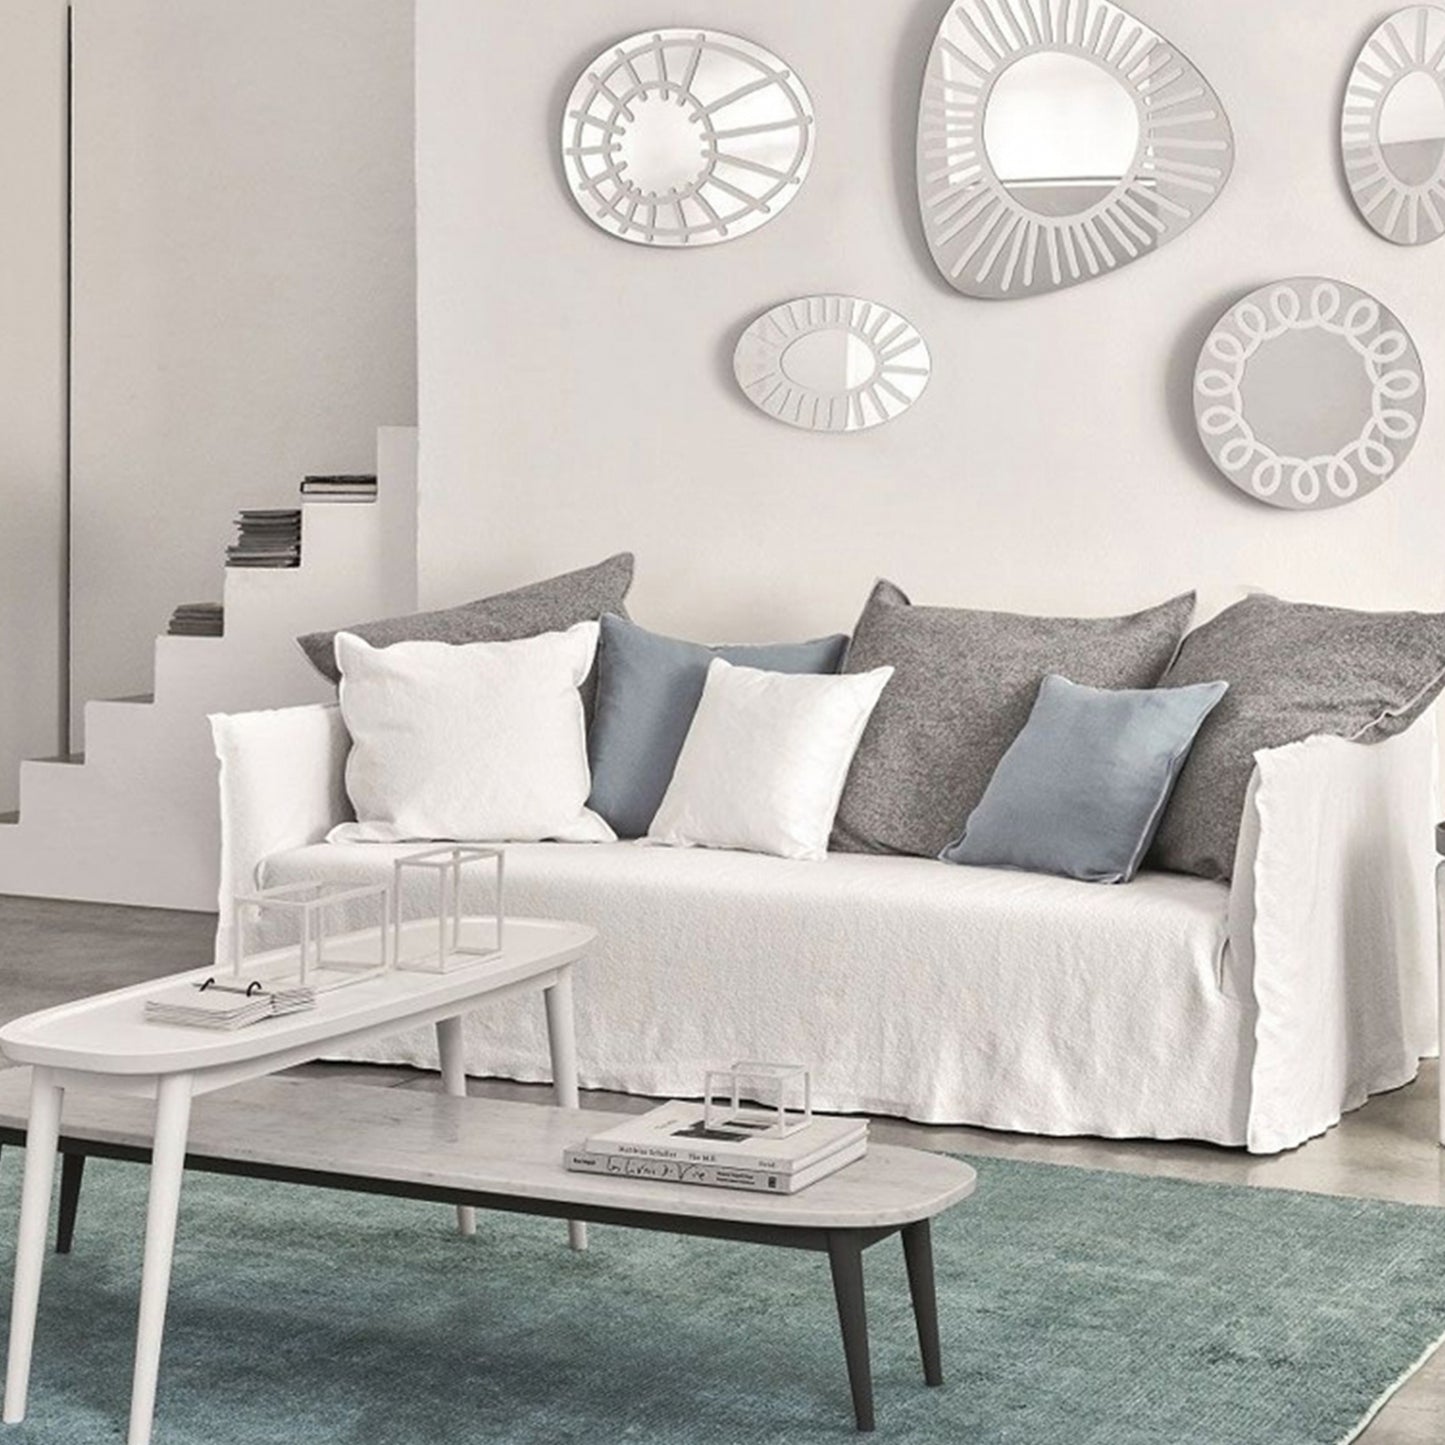 Gervasoni Ghost 110 Sofa in White Linen Upholstery by Paola Navone $6,300.00